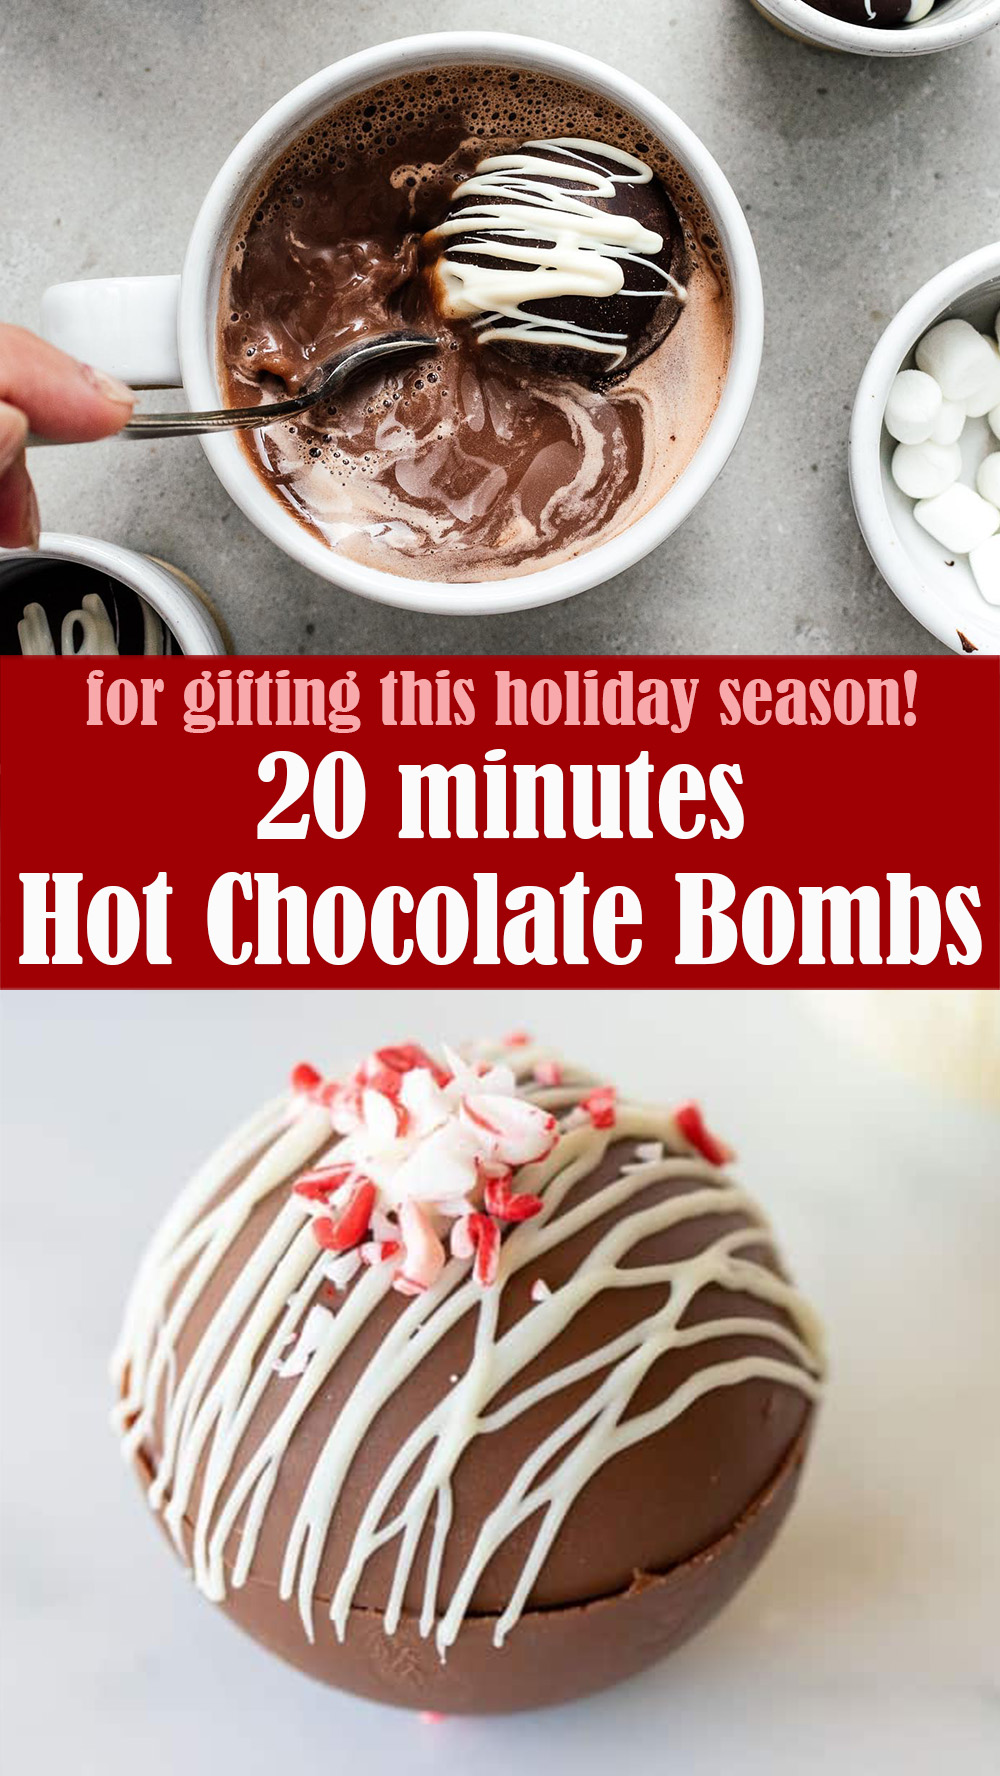 20 minutes Hot Chocolate Bombs